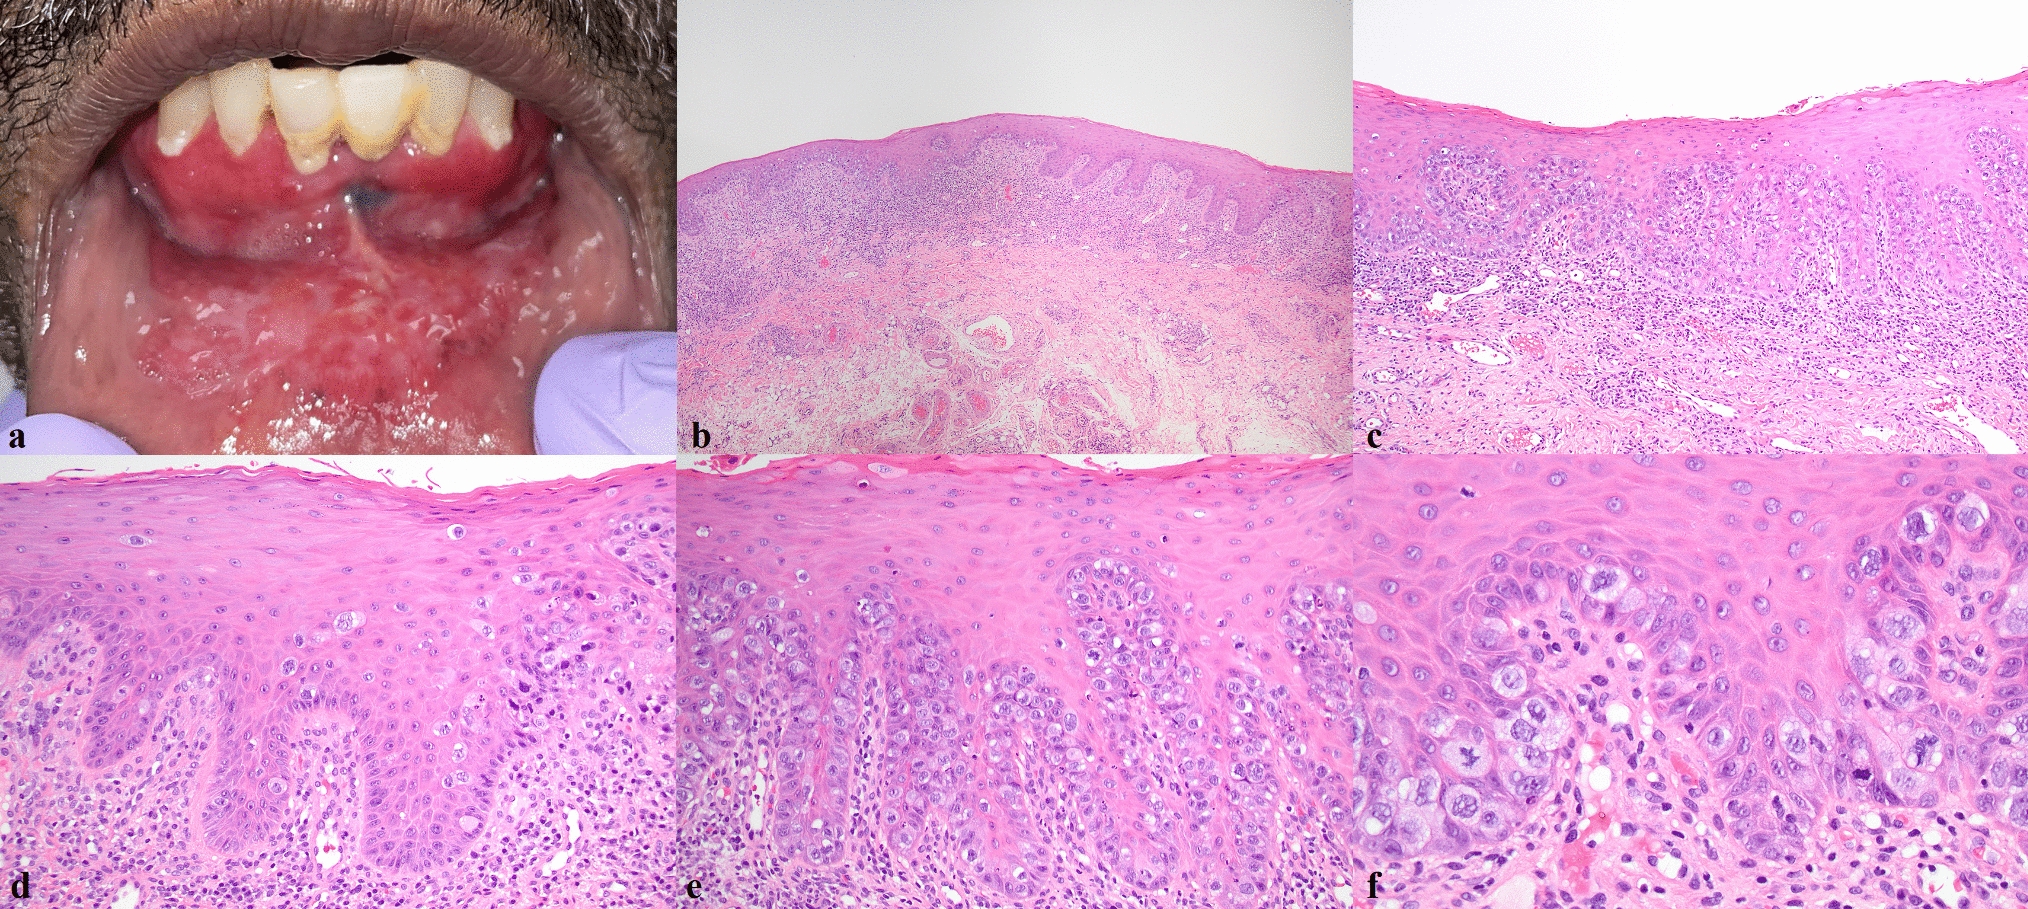 Extramammary Paget Disease of Oral Mucosa: Case Report with Literature Review